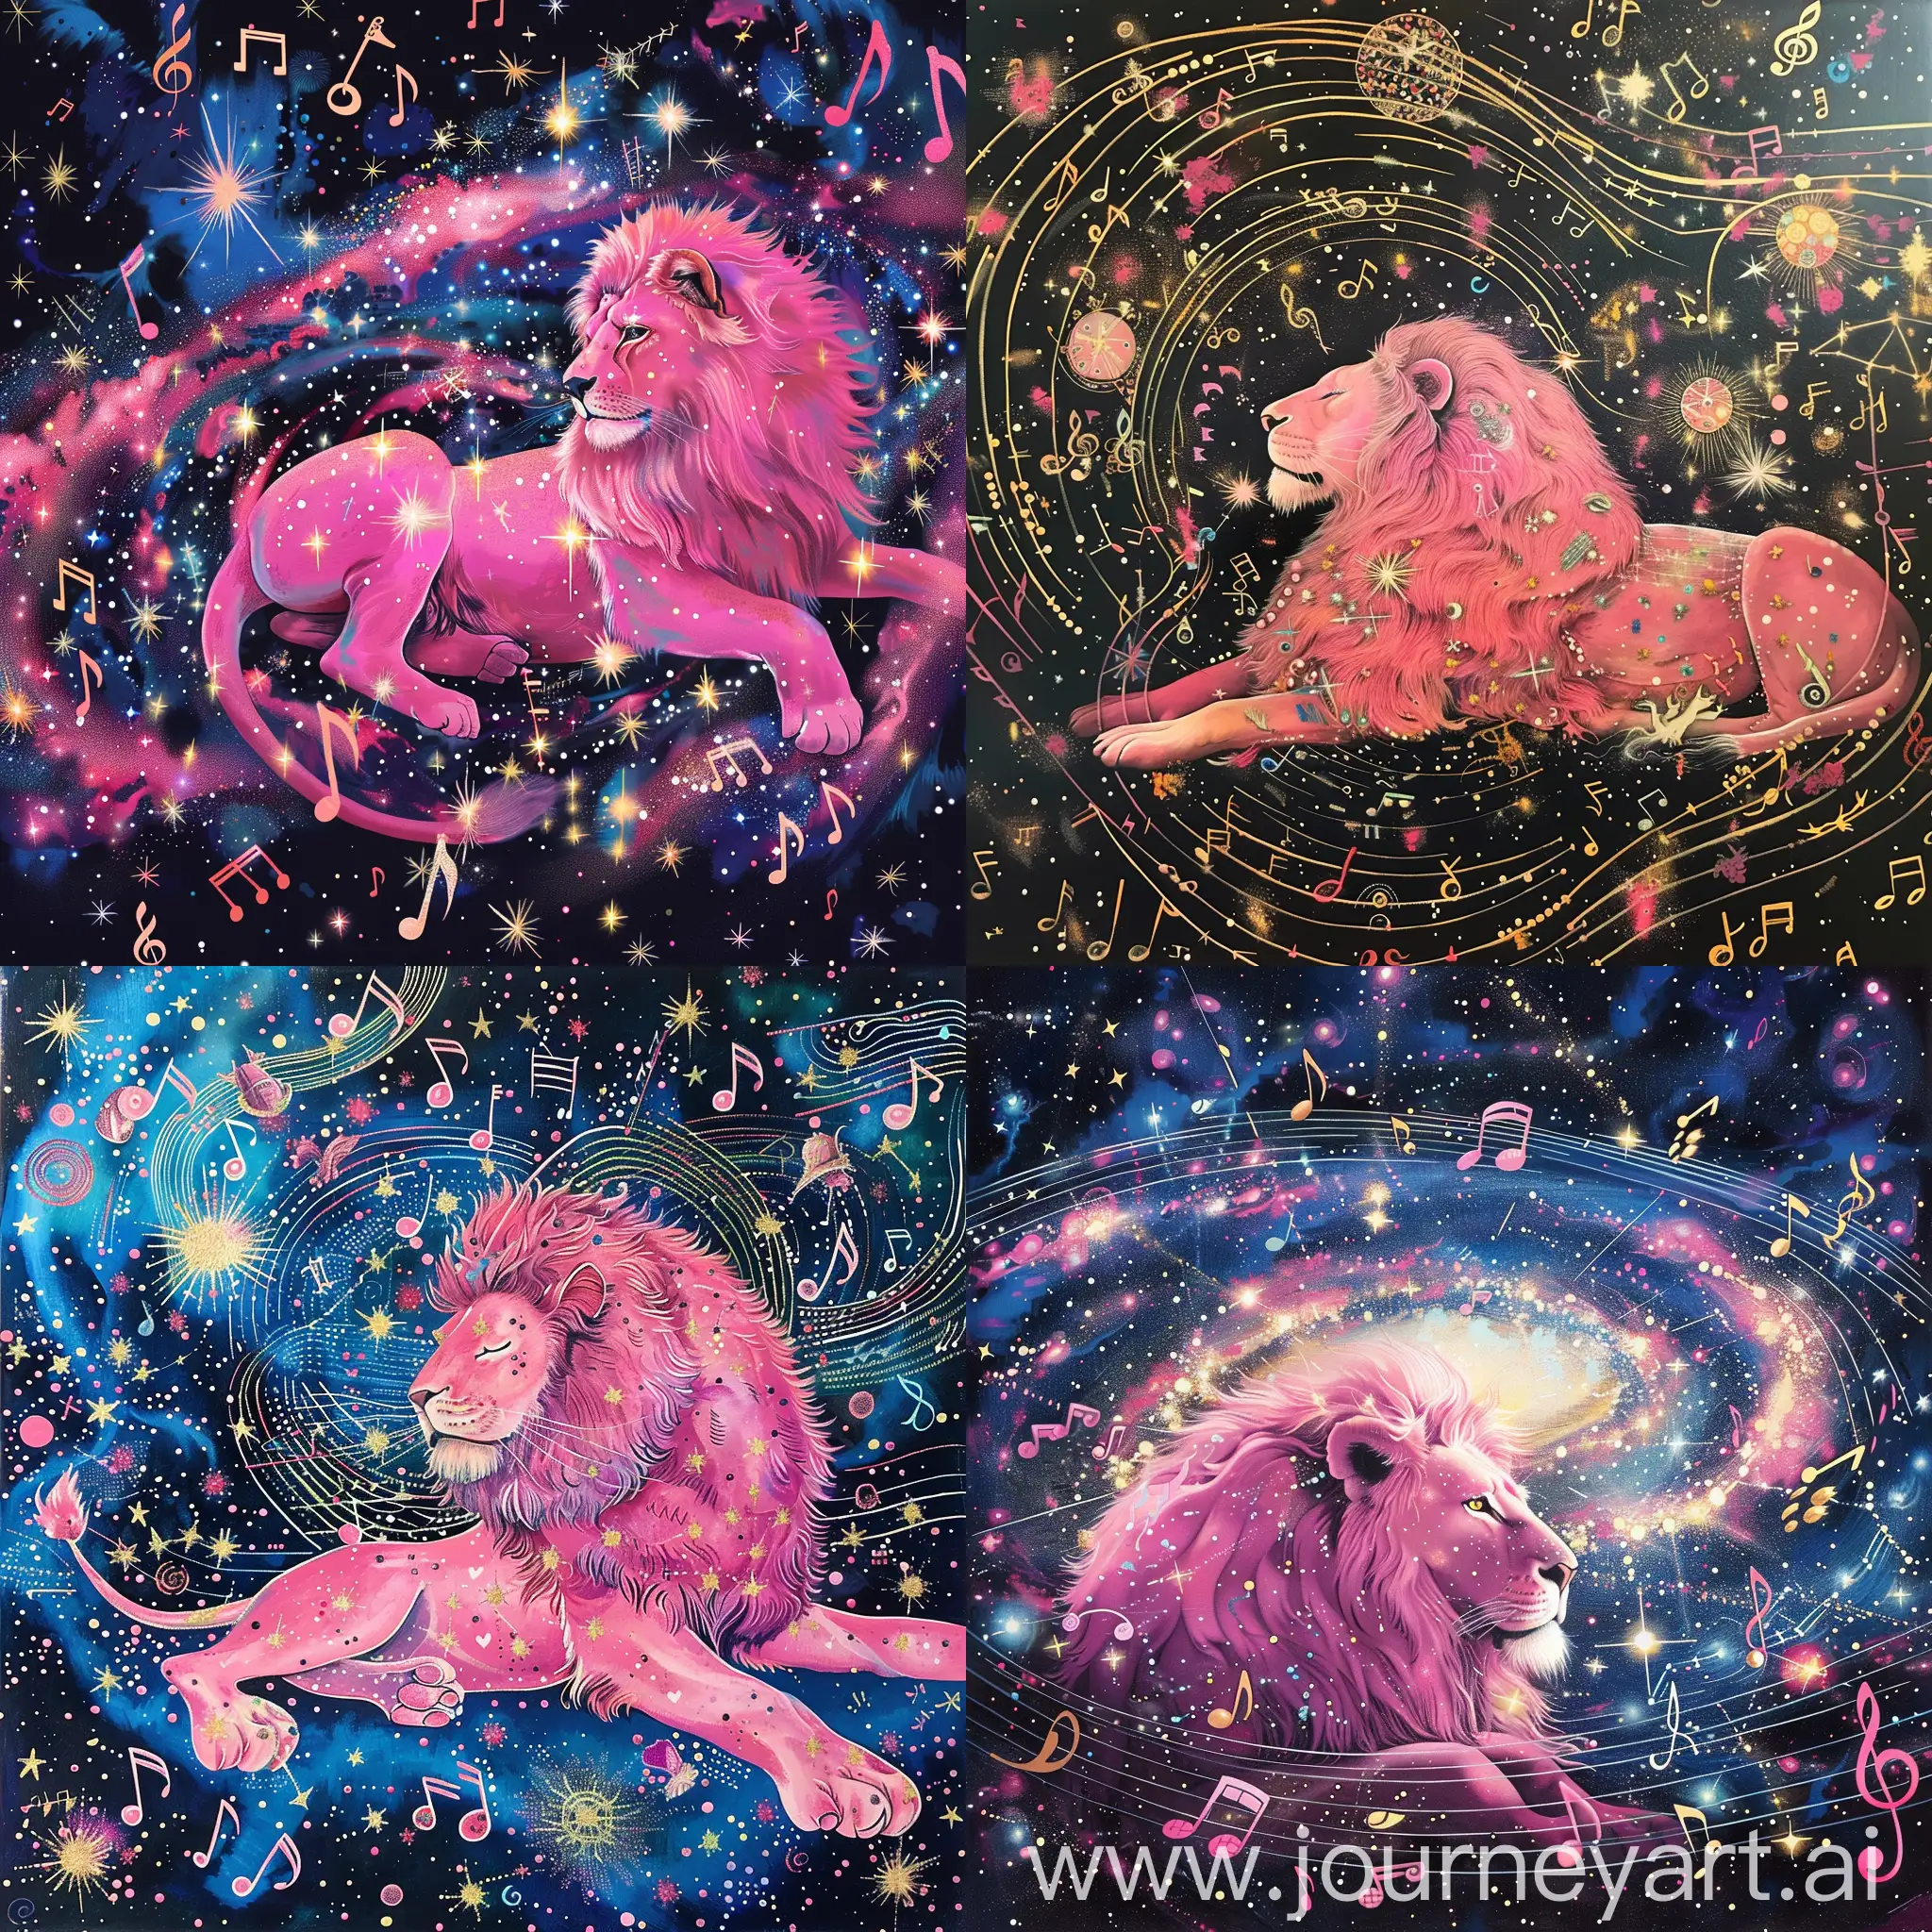 A pink lion, in a galaxy, is surrounded by many stars and musical notes.